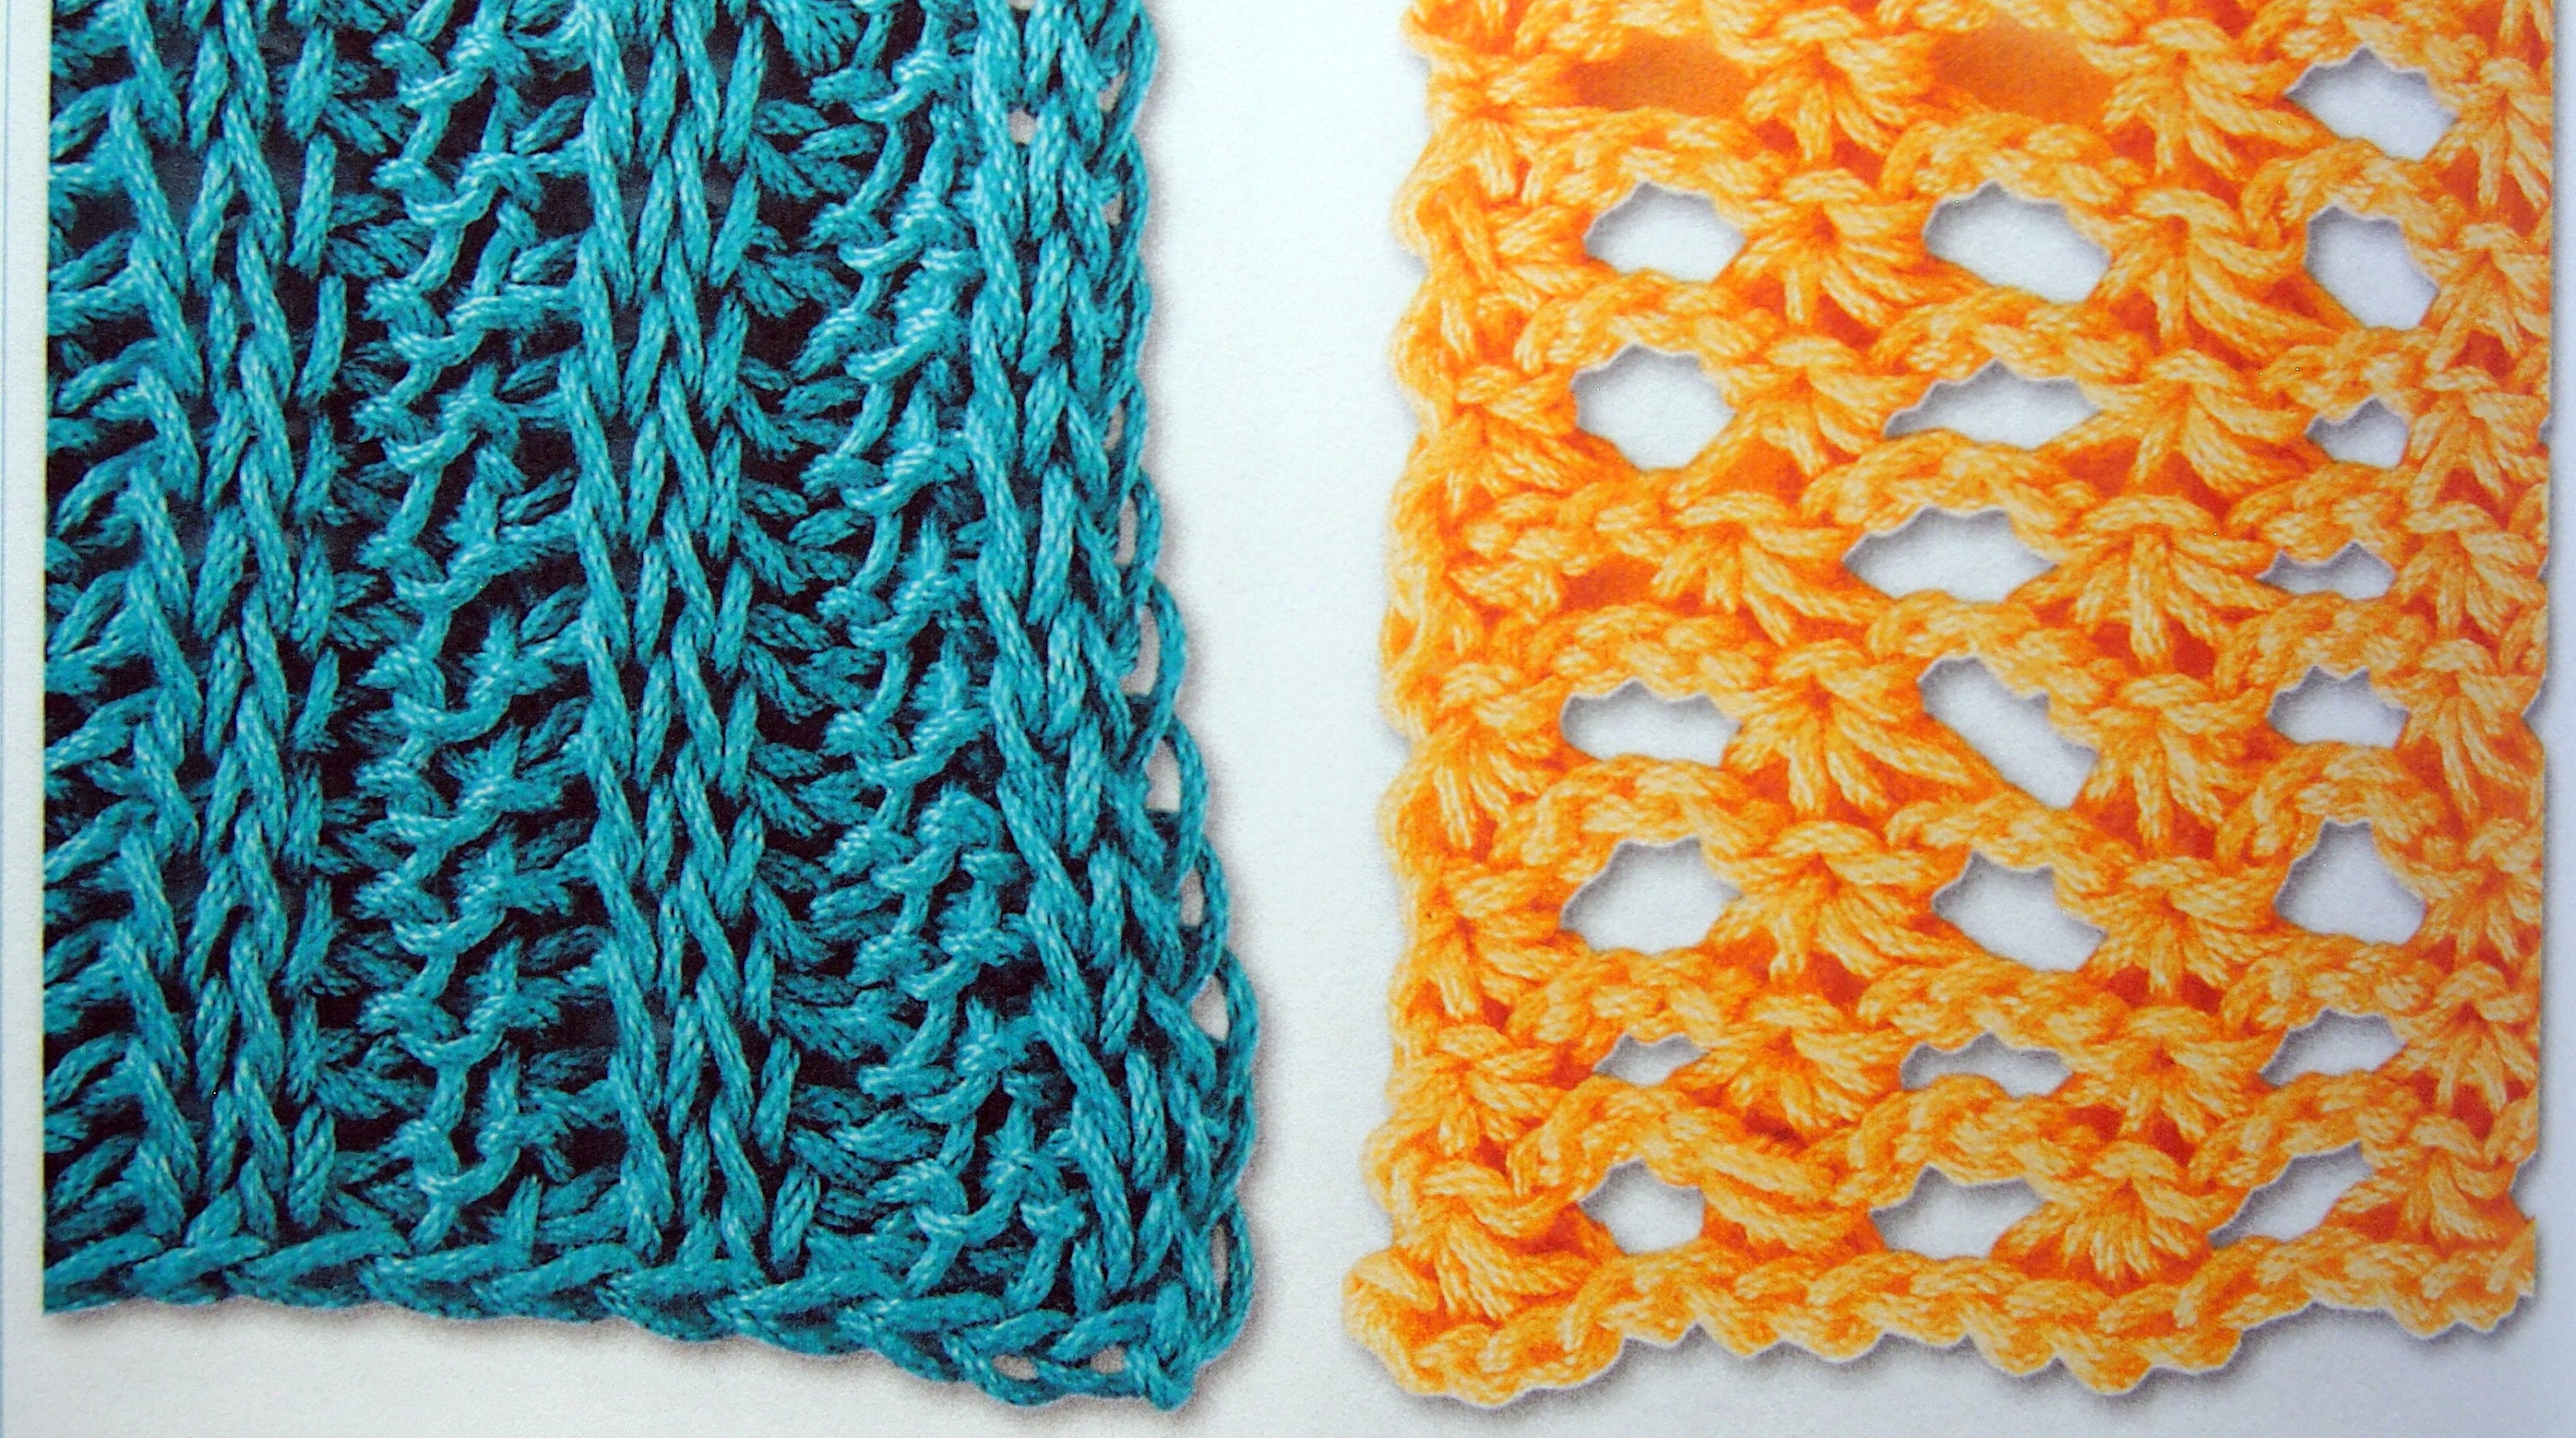 First Time Tunisian Crochet: Step-by-Step Basics Plus 5 Projects